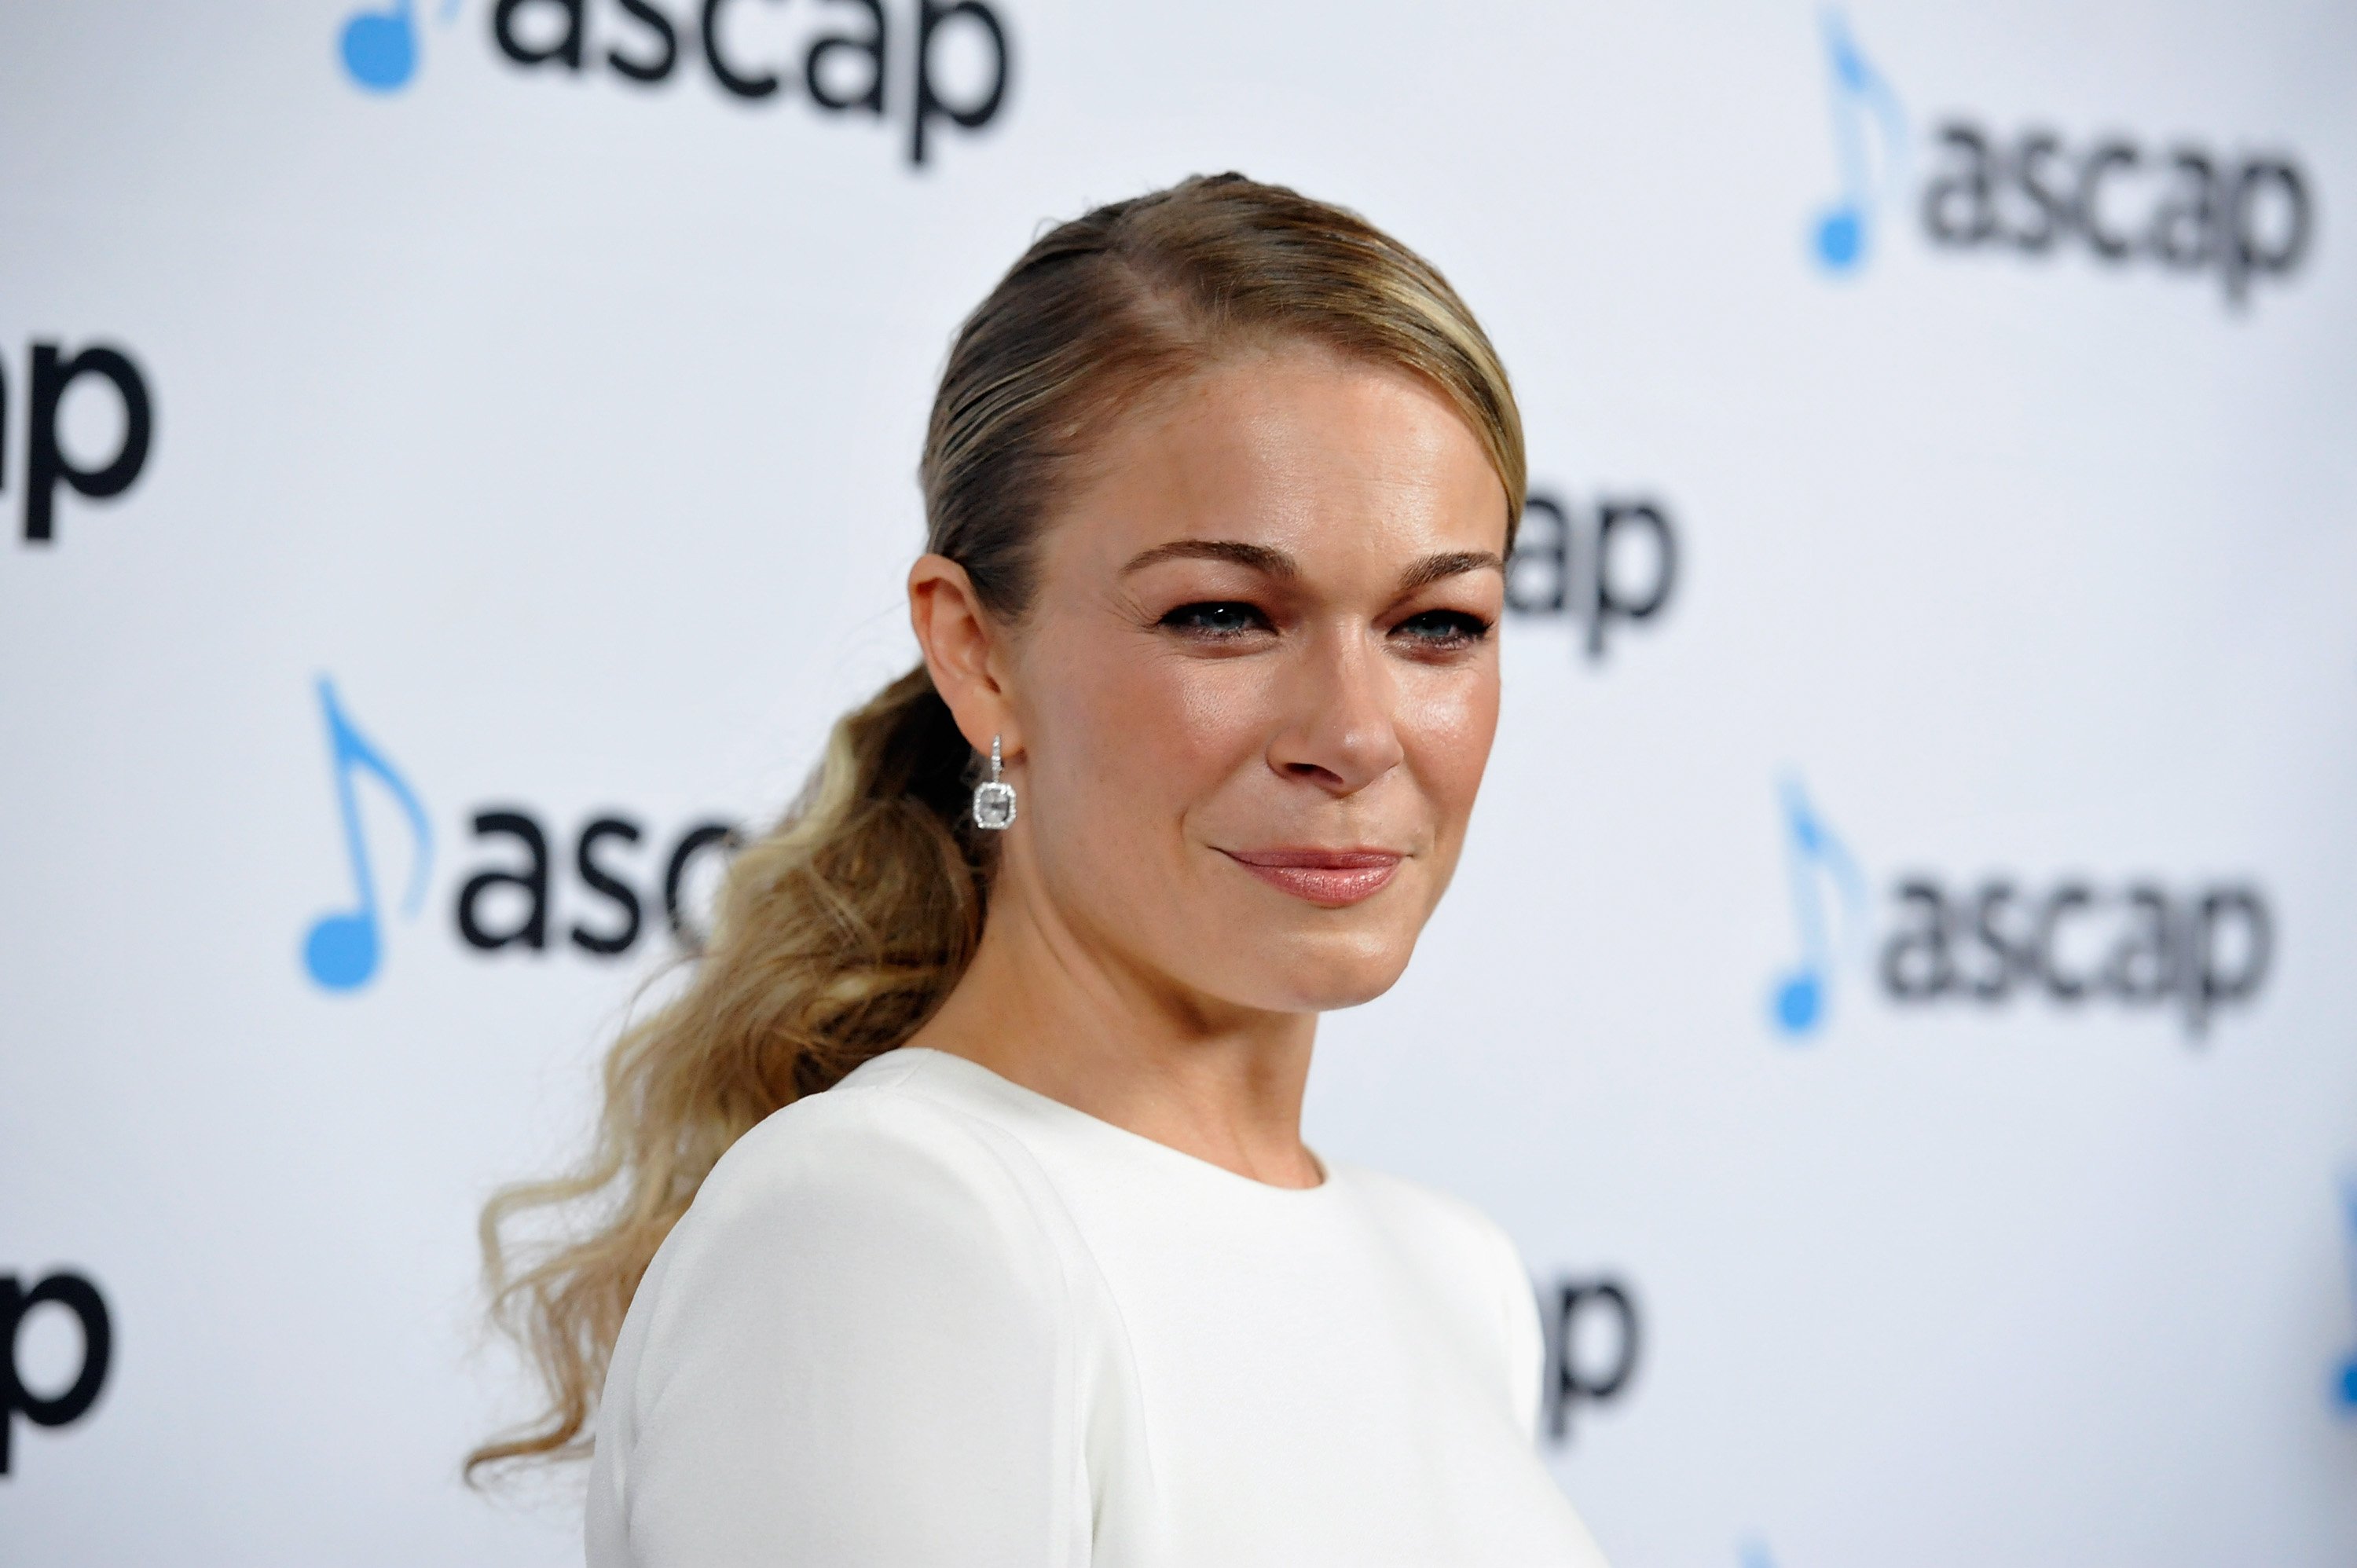 LeAnn Rimes attends the 34th Annual ASCAP Pop Music Awards on May 18, 2017 | Photo: Getty Images.